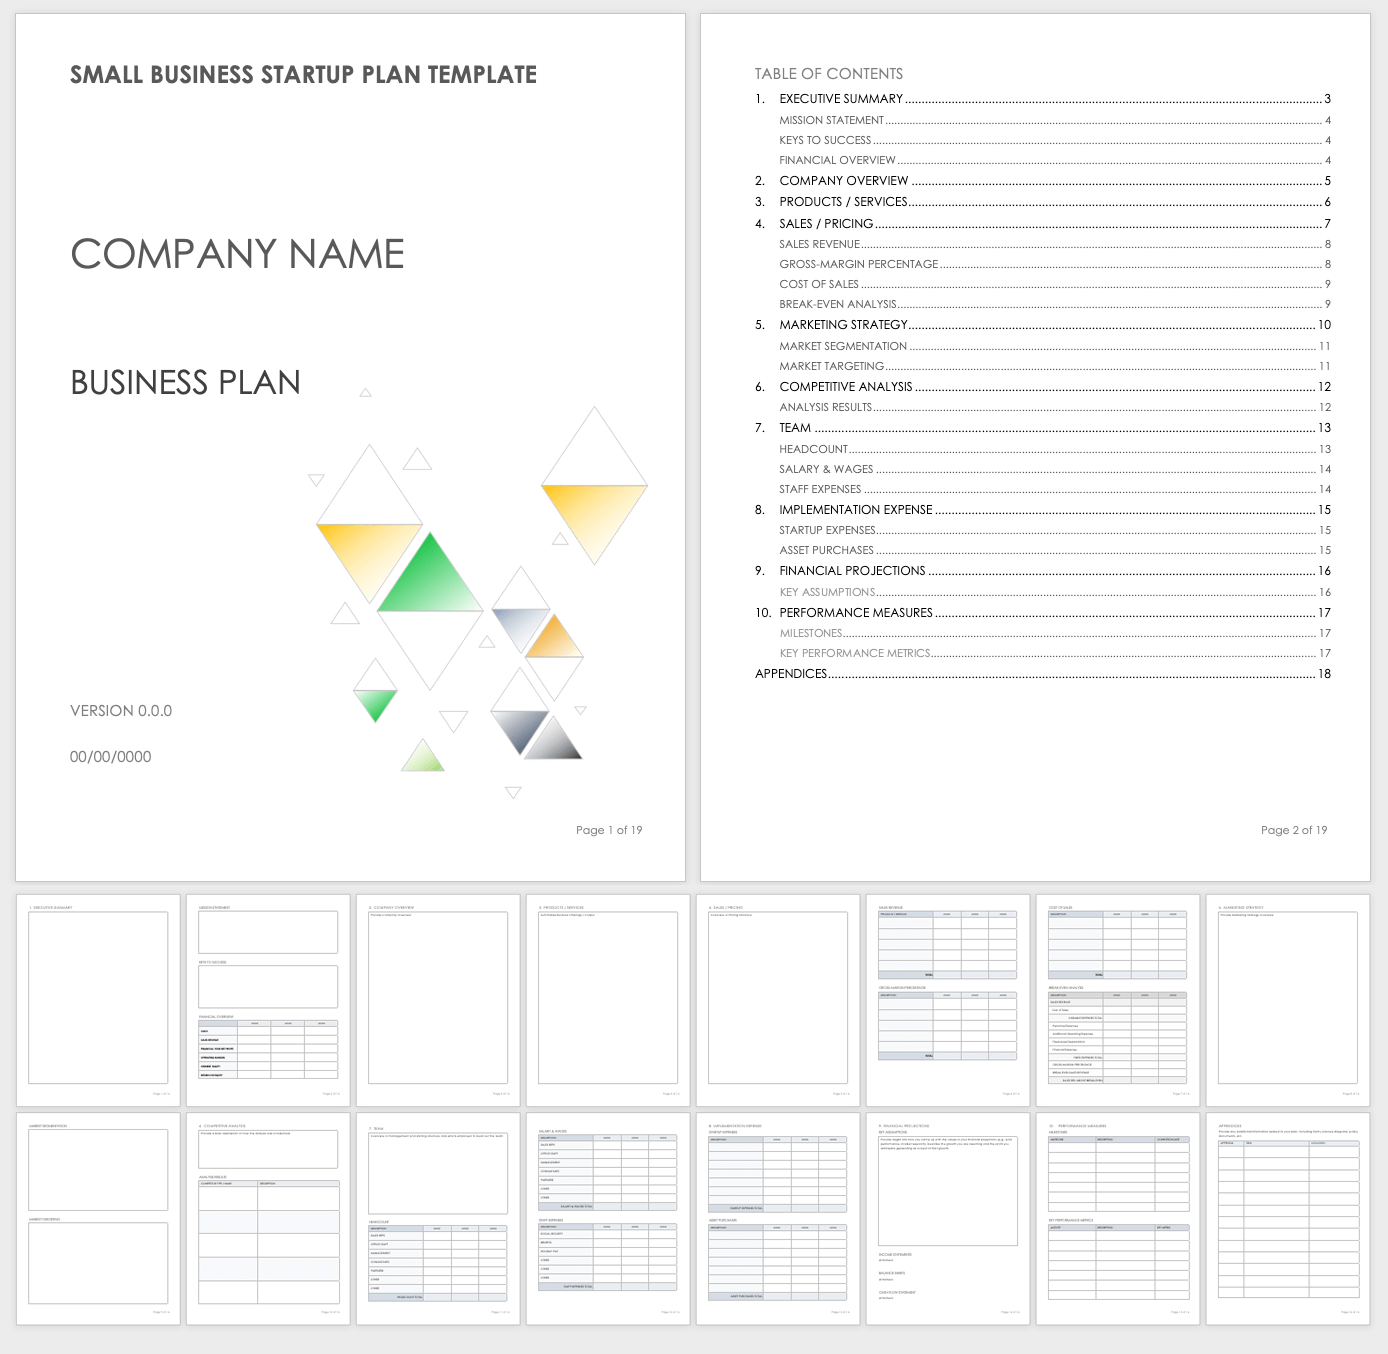 Small Business Startup Plan Template